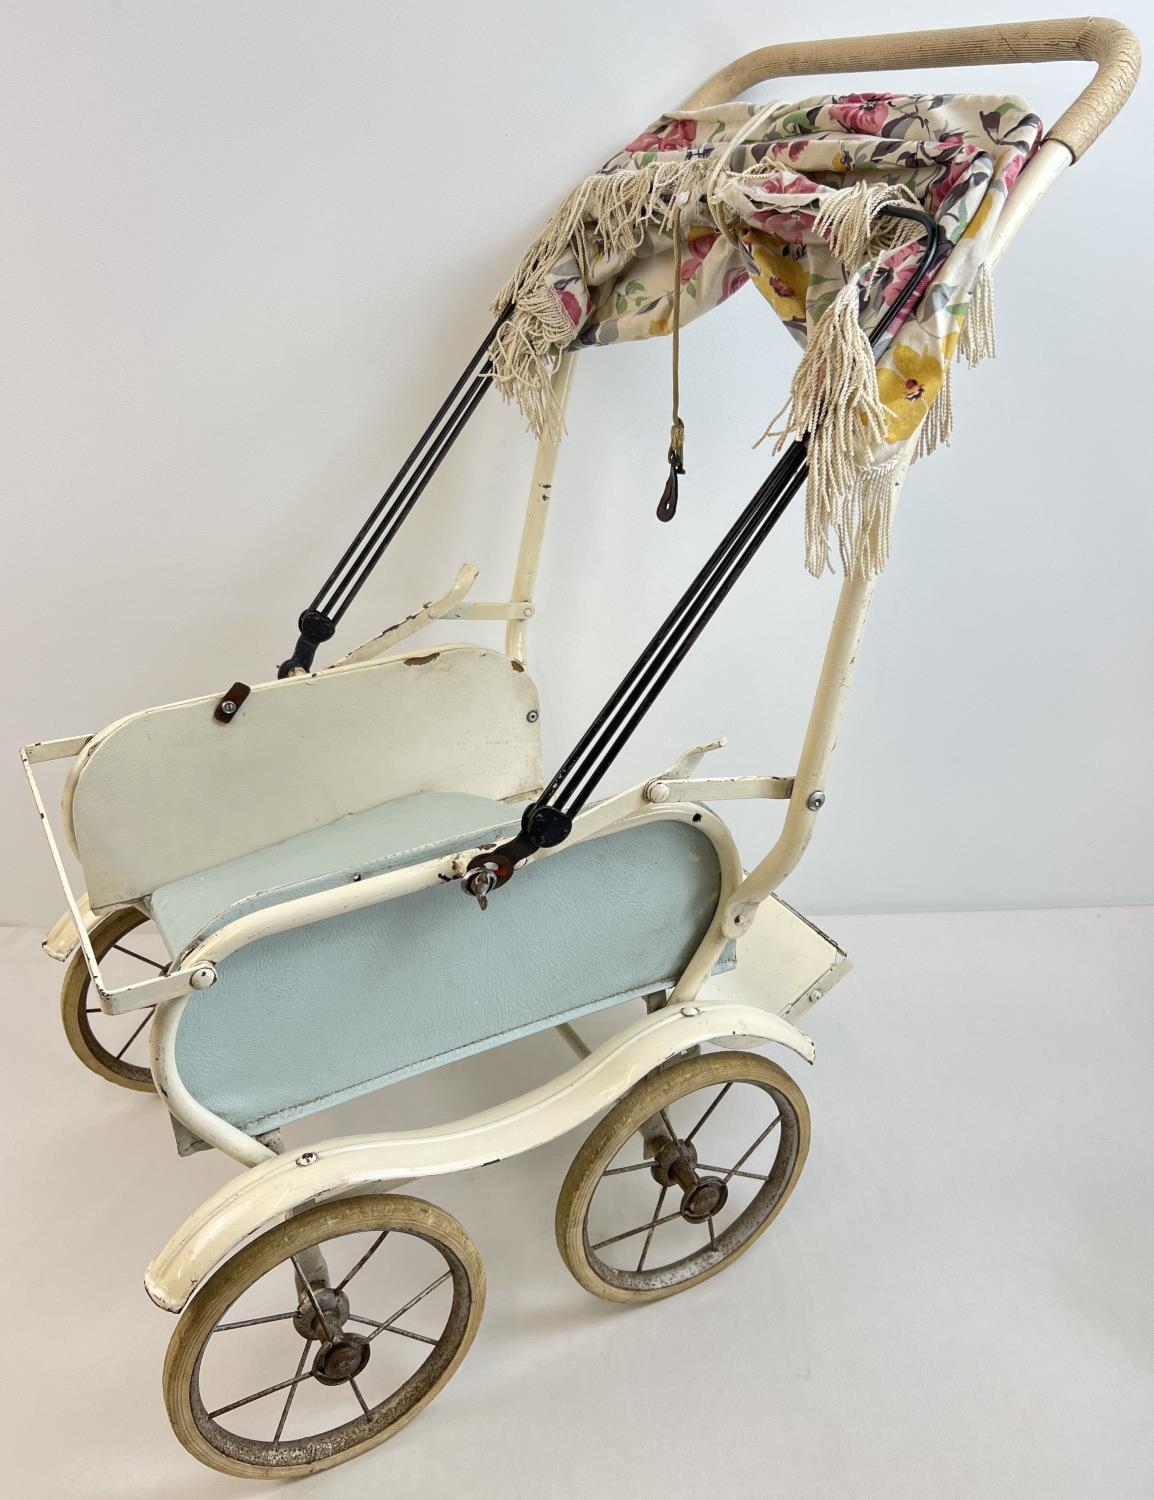 A vintage Marmet dolls pushchair with rubber tyres and grip handle. Original canopy frame has had